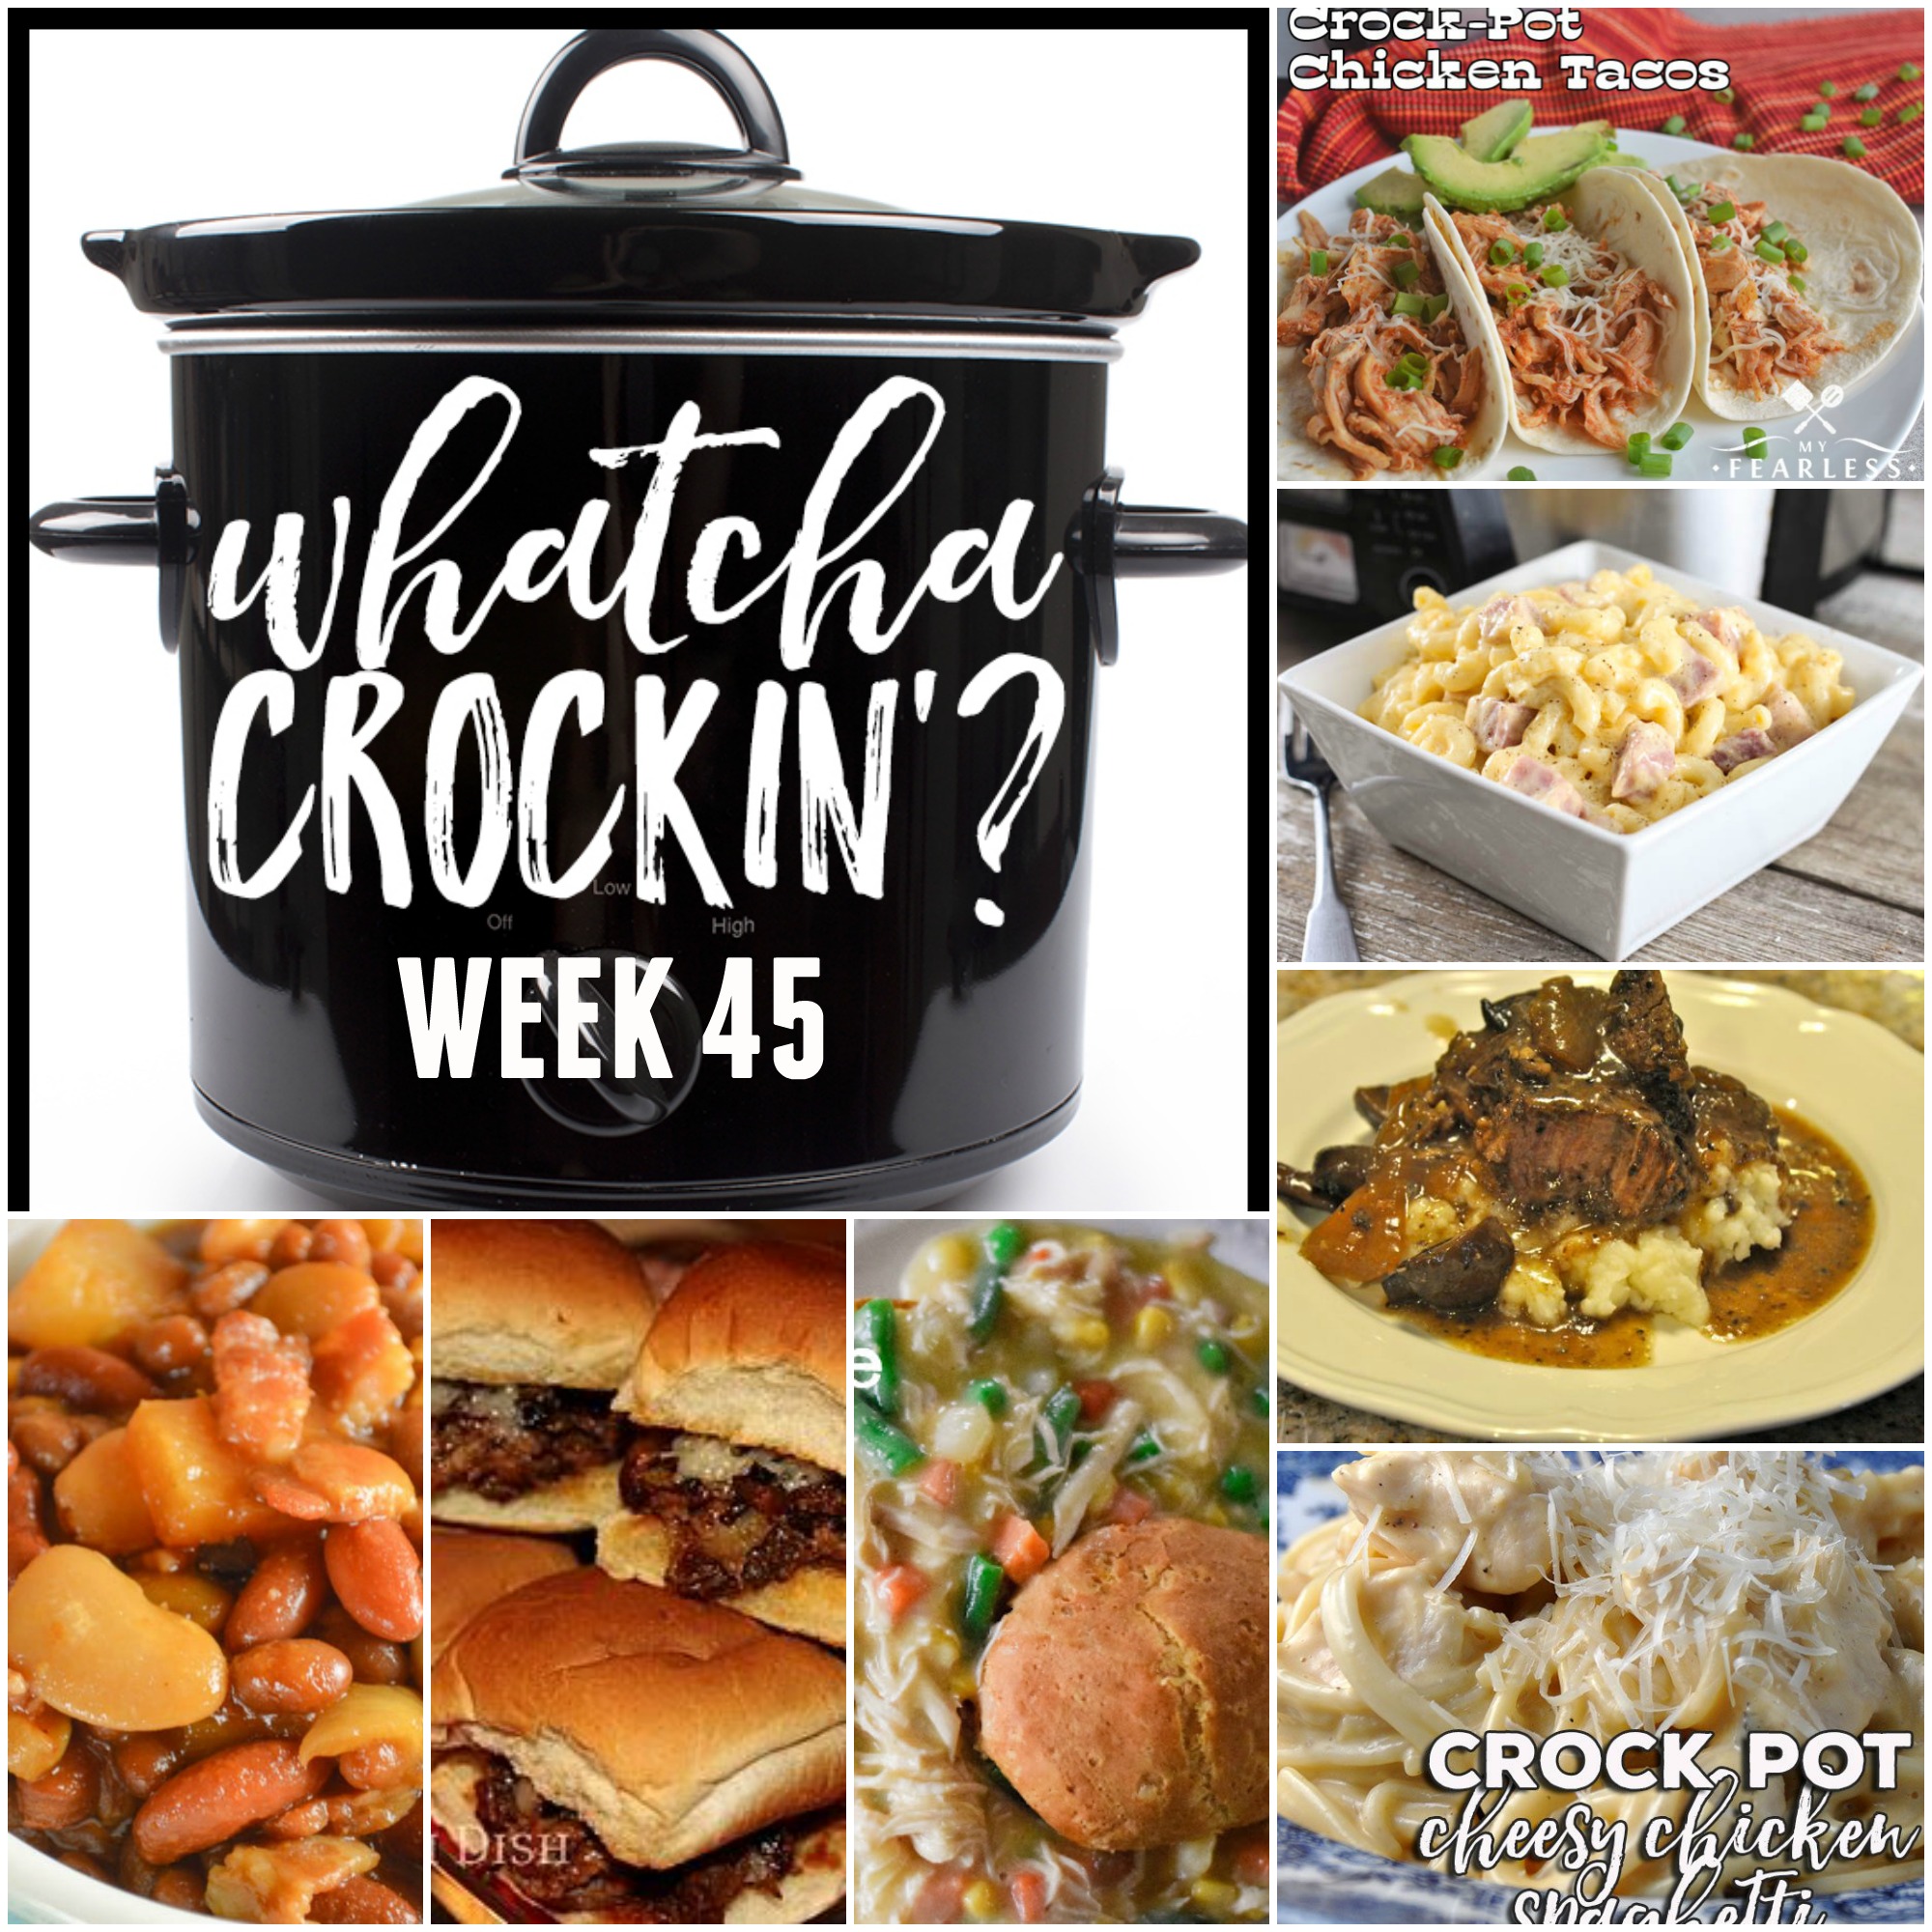 This week’s Whatcha Crockin’ crock pot recipes are all about comfort food, including 3 Envelope Crock Pot Roast Beef Sliders, Crock Pot Macaroni and Cheese with Ham, Crock Pot Baked Beans with Pineapple Chunks, Red Wine Crock Pot Beef Roast with Mushrooms and Onions, Crock Pot Cheesy Chicken Spaghetti, Crock Pot Chicken Pot Pie, Crock Pot Chicken Tacos, Ultimate Creamed Corn Slow Cooker and many more!